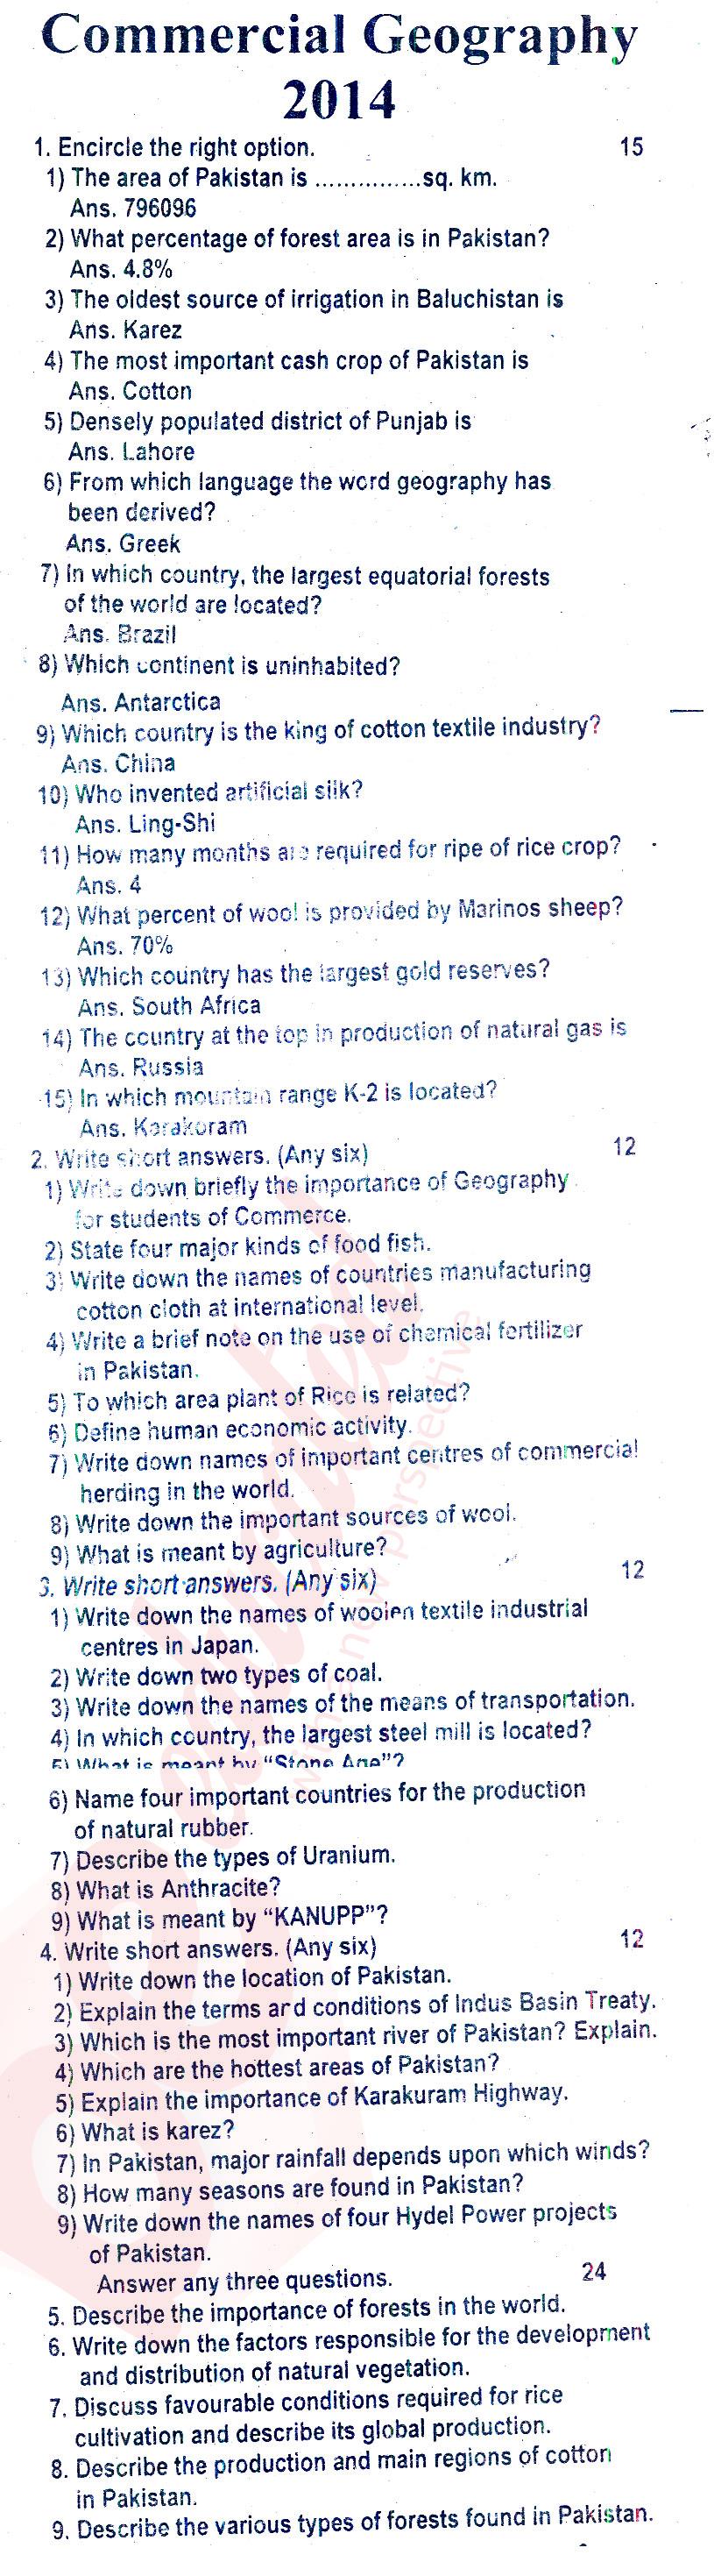 Commercial Geography ICOM Part 2 Past Paper Group 1 BISE Rawalpindi 2014